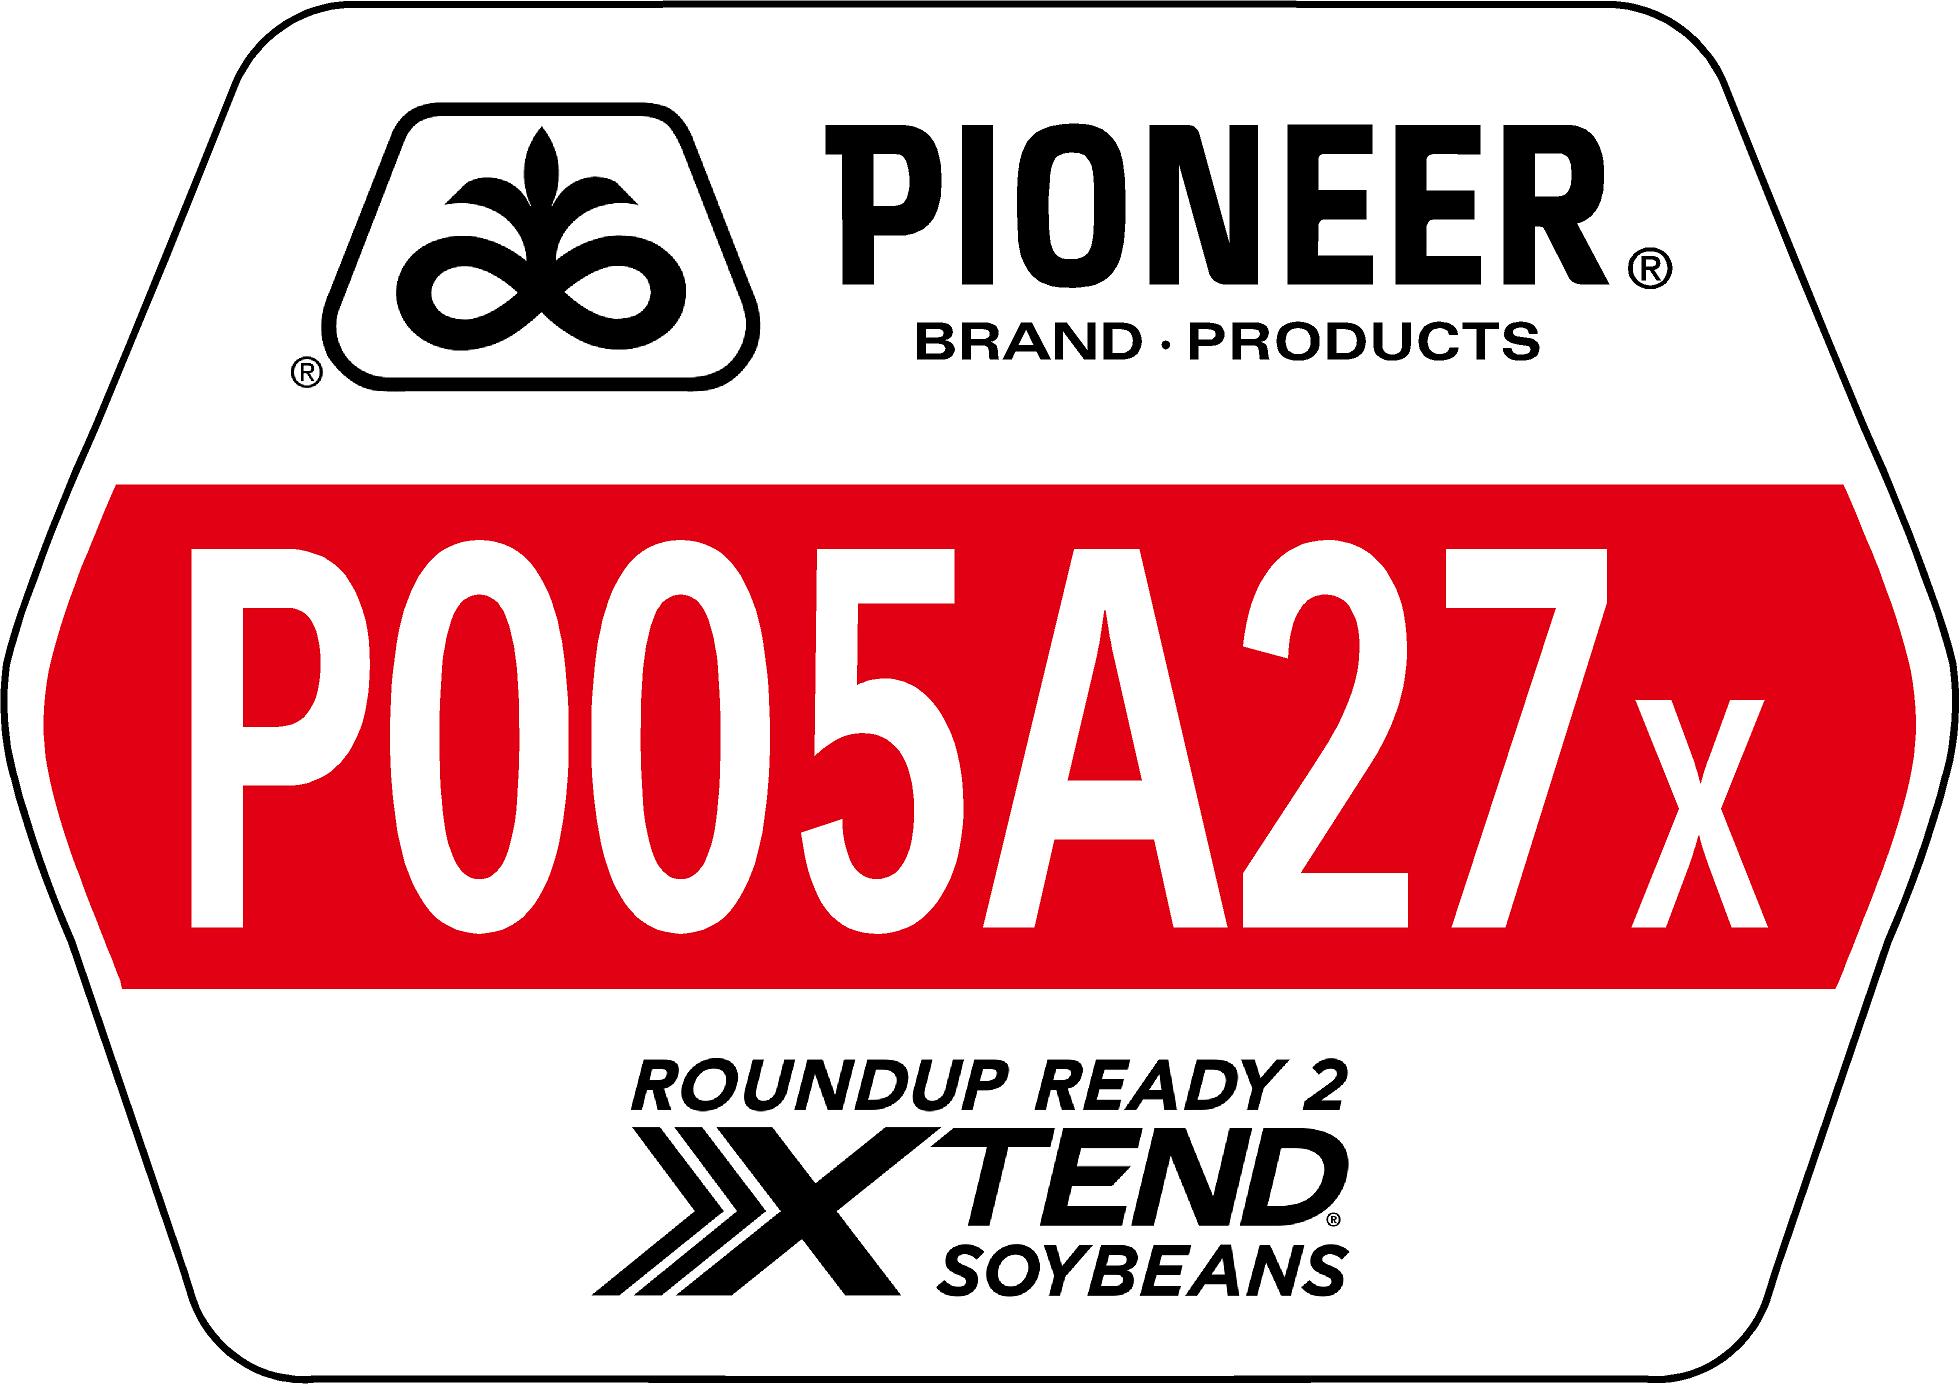 Field Sign > Soybeans > P005A27X